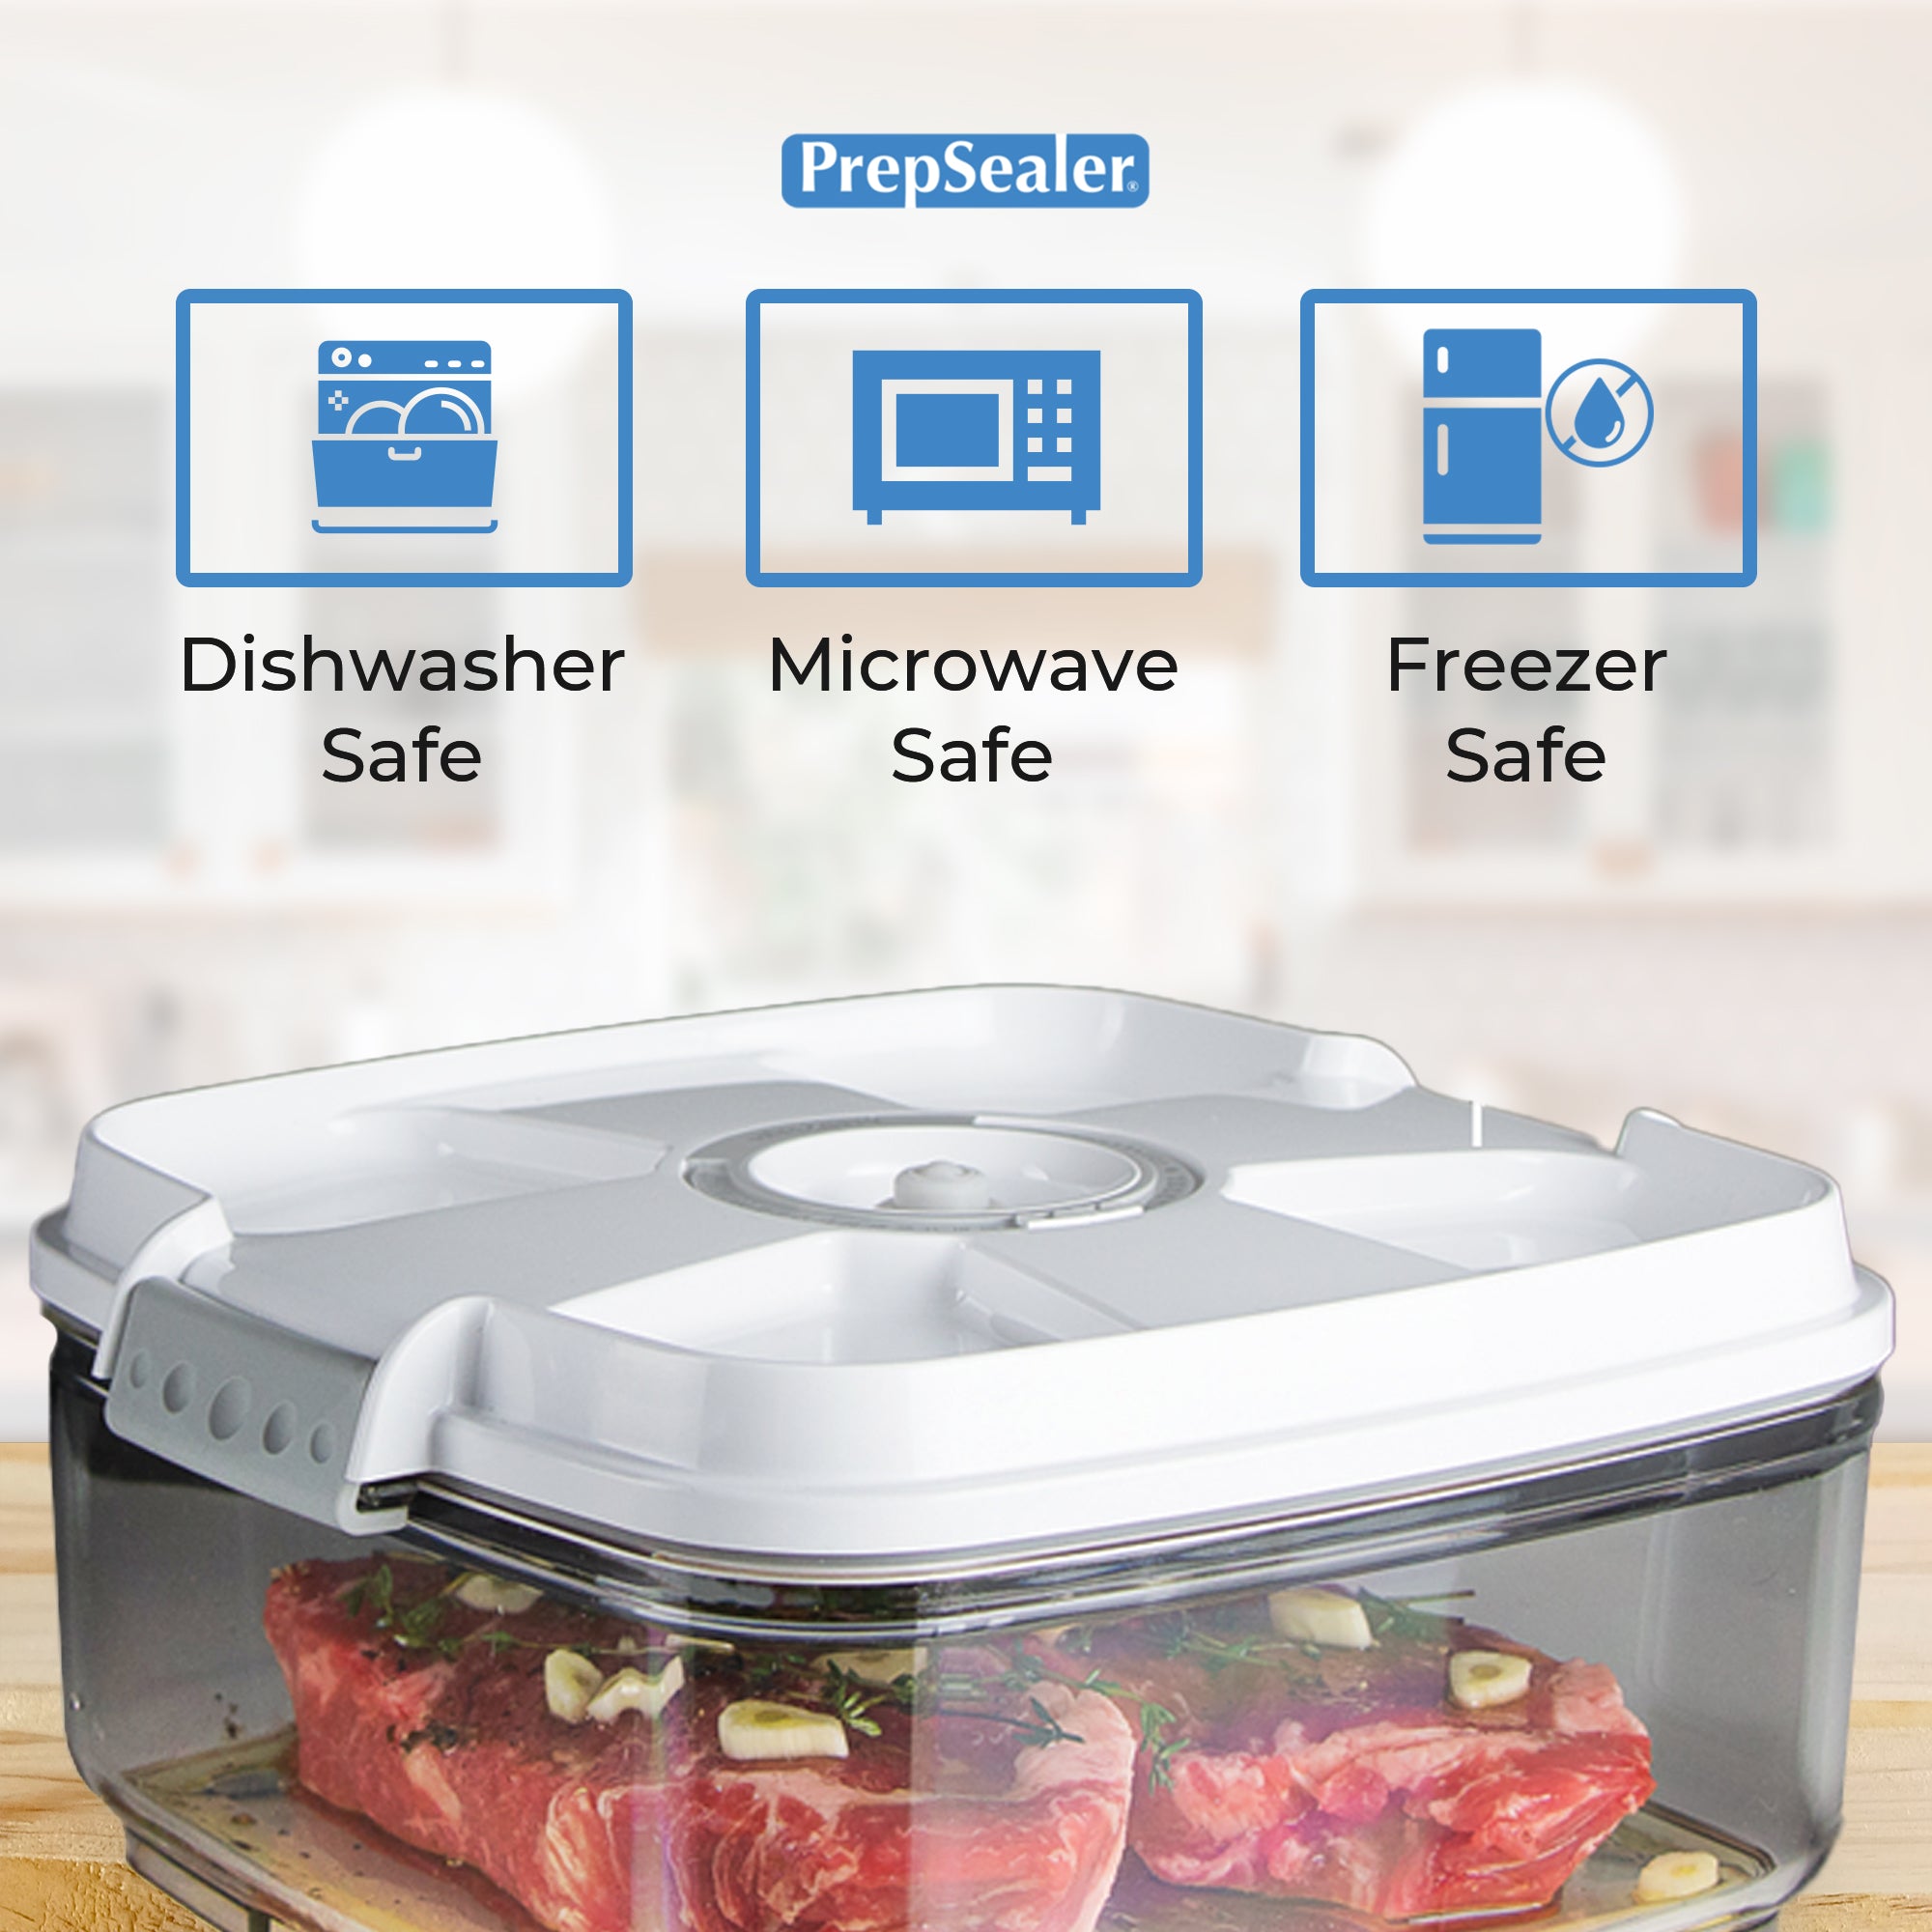 SNUGTOPIA Vacuum Seal Food Storage Containers - Fresh Save/Keep Dry - 2  Pcs, Clear, BPA Free, Leak Proof - Dishwasher, Freezer & Microwave Safe